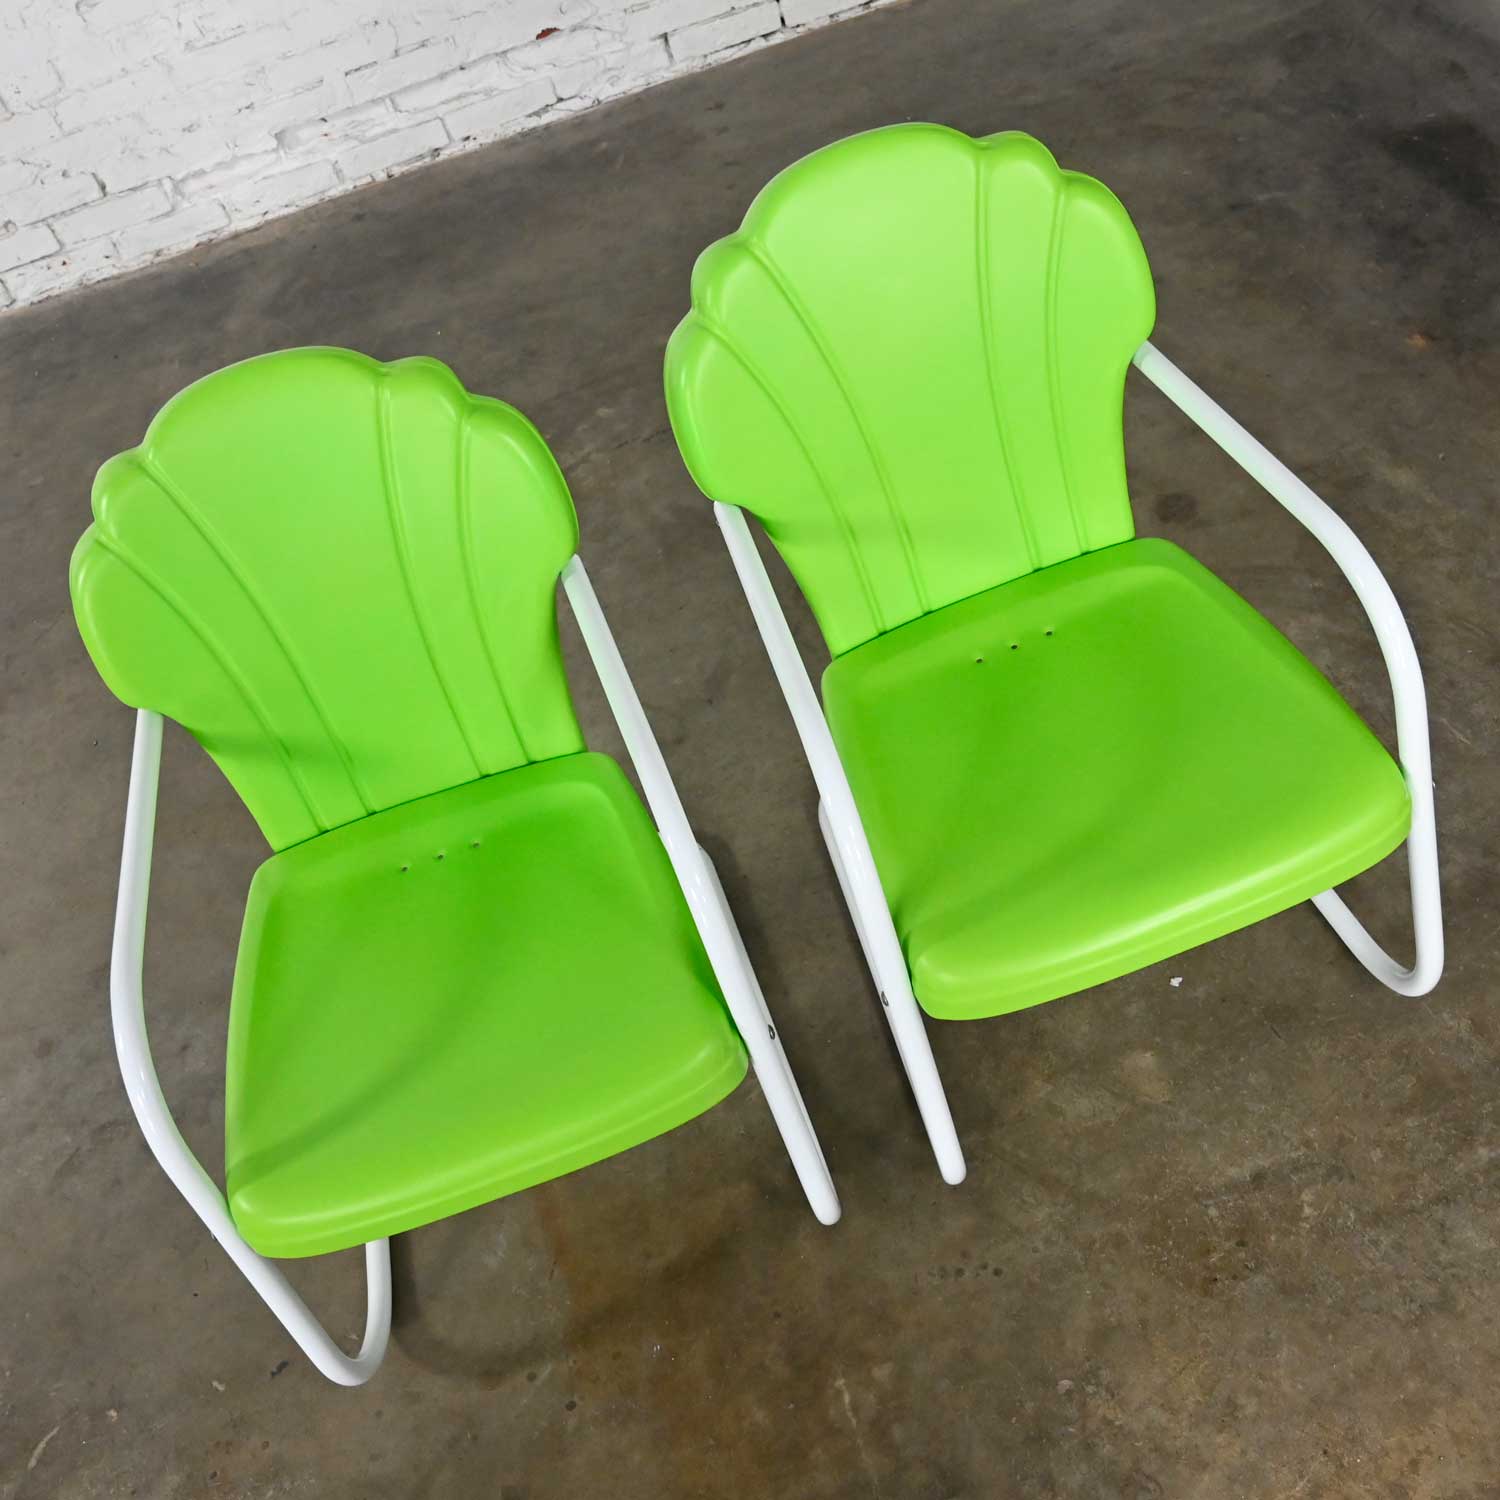 Vintage Mid Century Modern Green & White Metal Outdoor Cantilever Springer Chairs